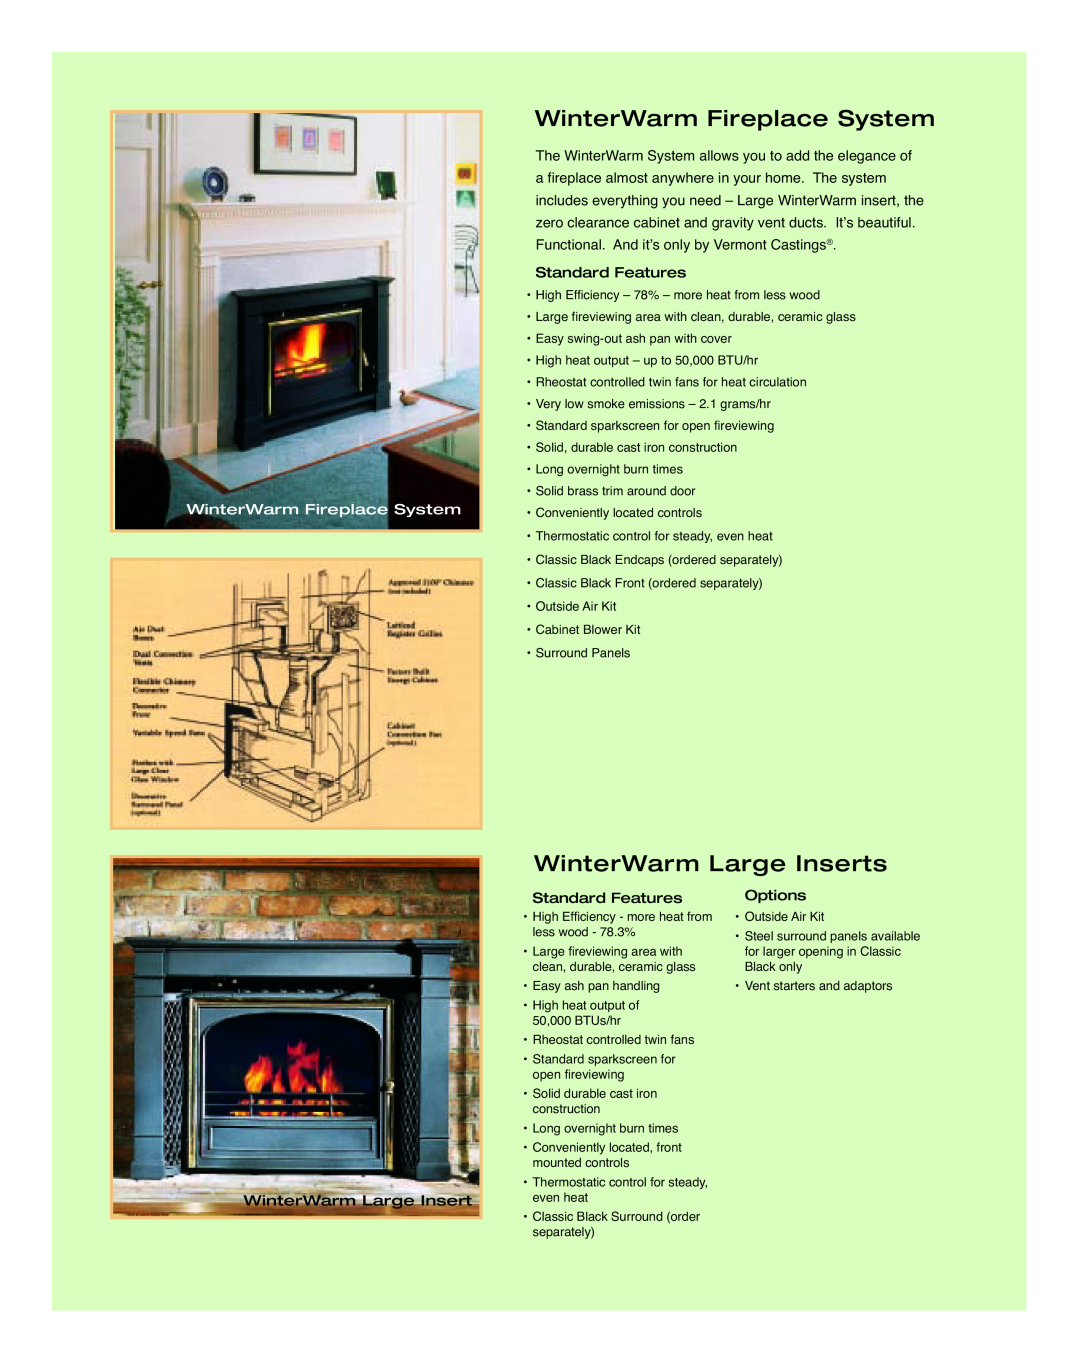 Vermont Casting Wood Fireplace manual WinterWarm Fireplace System, WinterWar m Large Inserts, Standard Features 